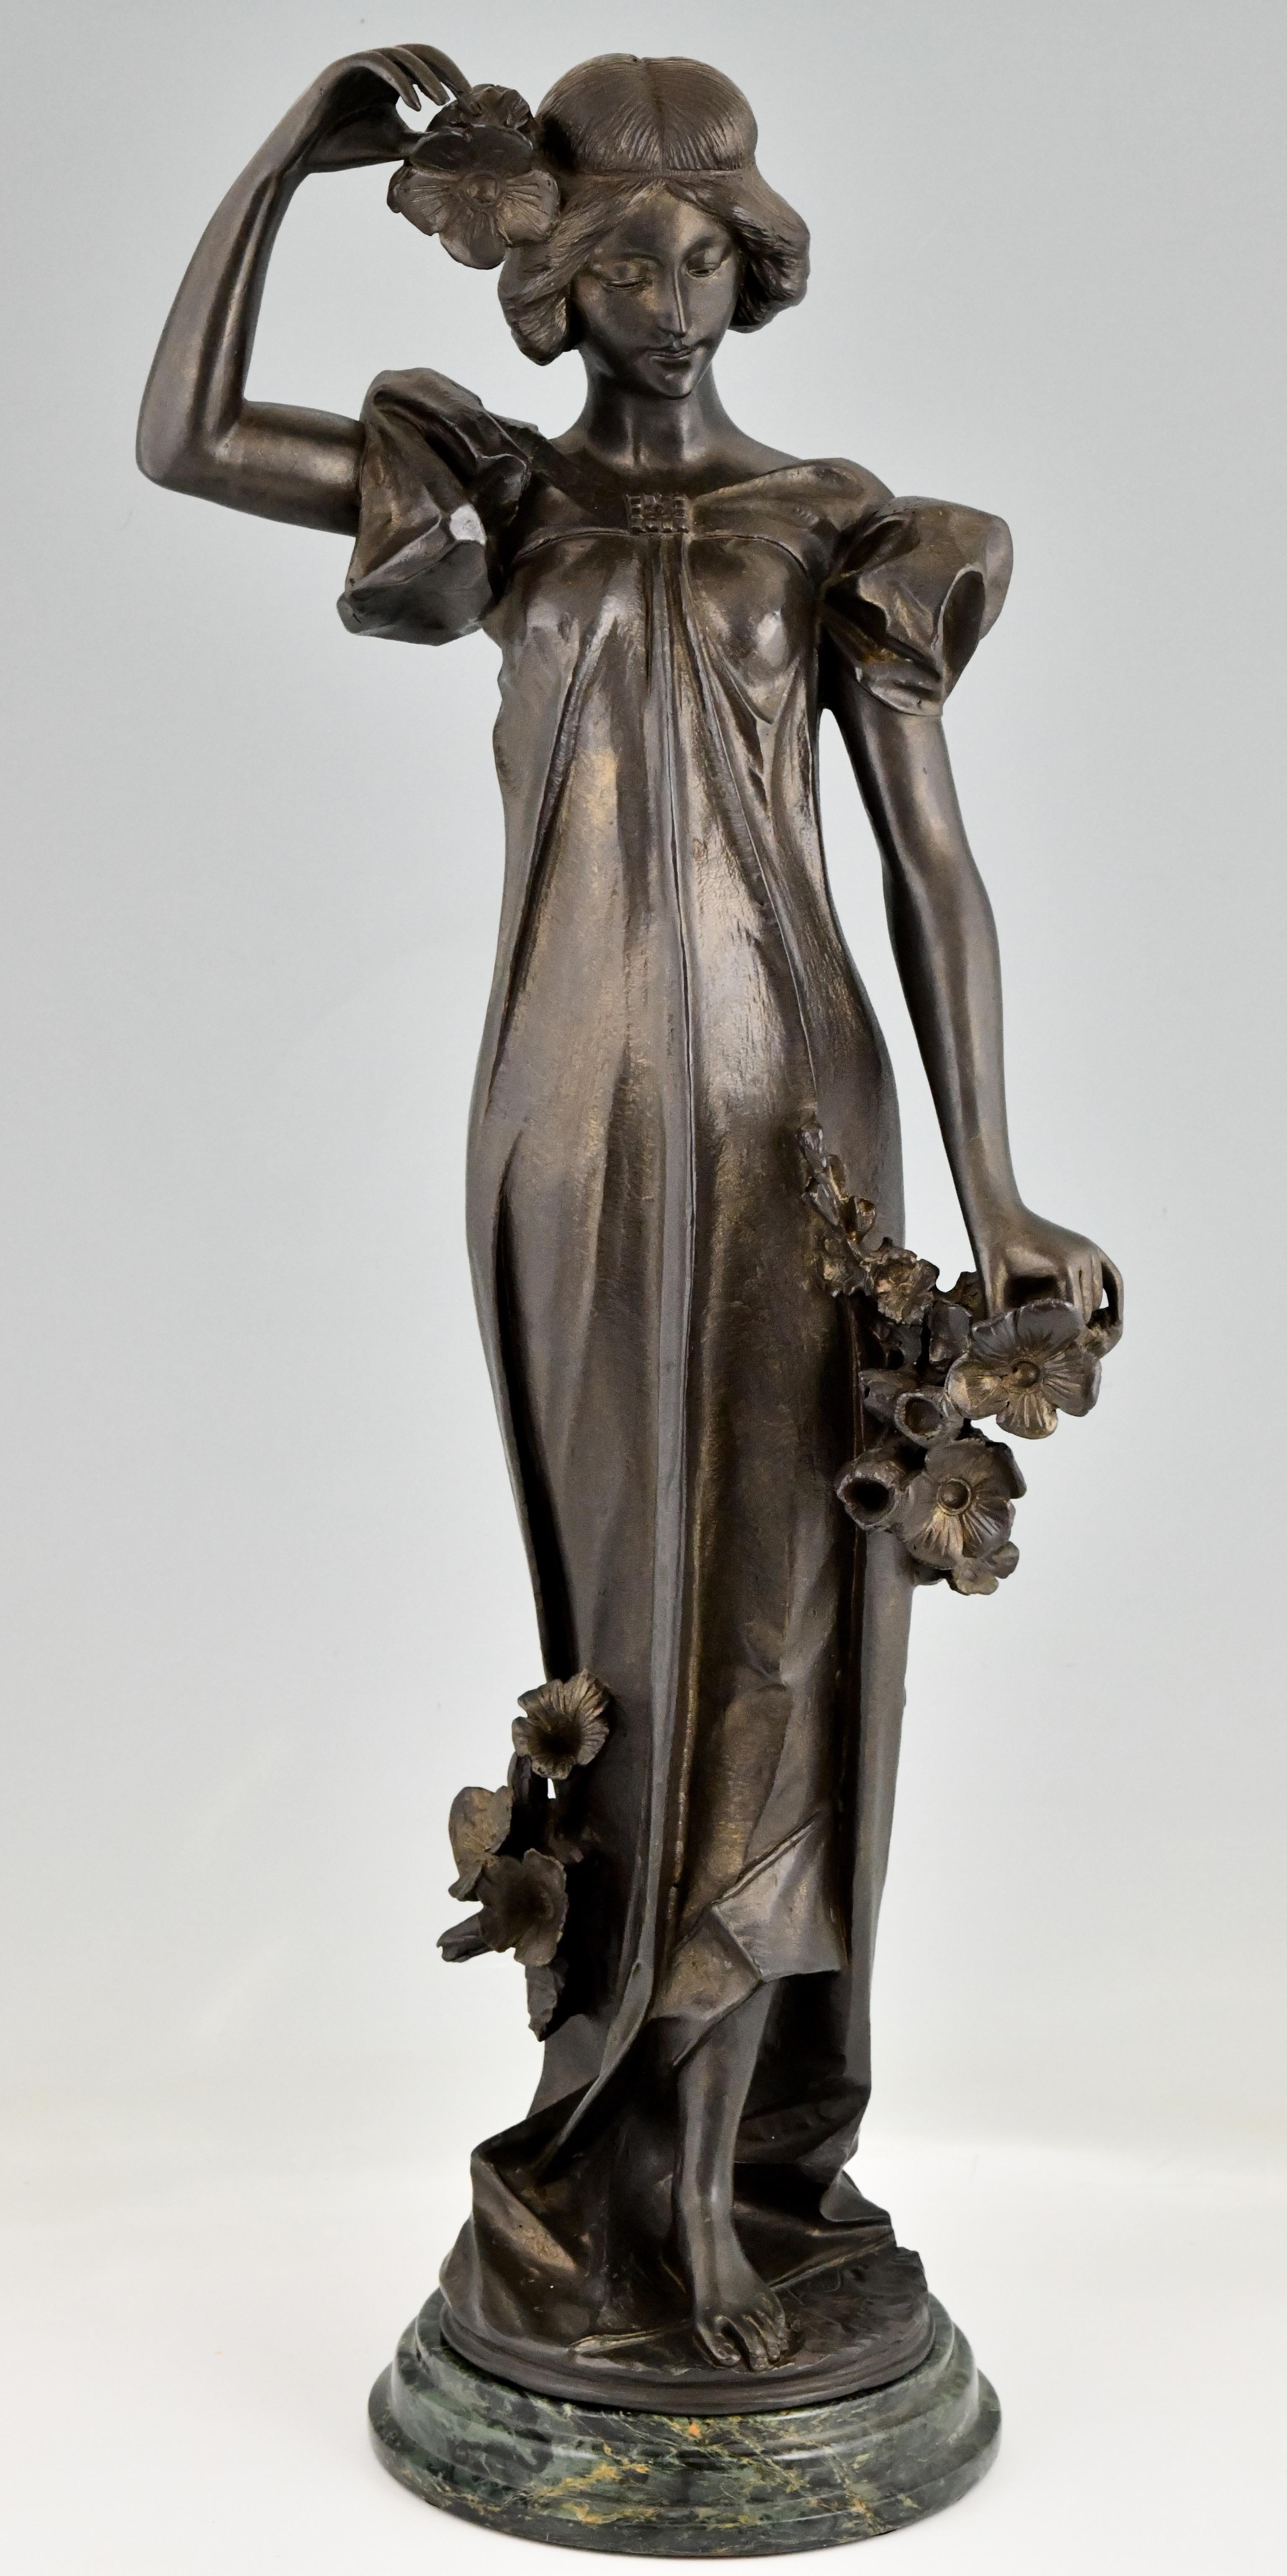 Art Nouveau bronze sculpture lady with poppies signed by Adolpho Cipriani
Patinated bronze on a green marble base. 
Cipriani was an Italian artist who worked in France. 
Ca. 1900. 
Weight 25 KG. 